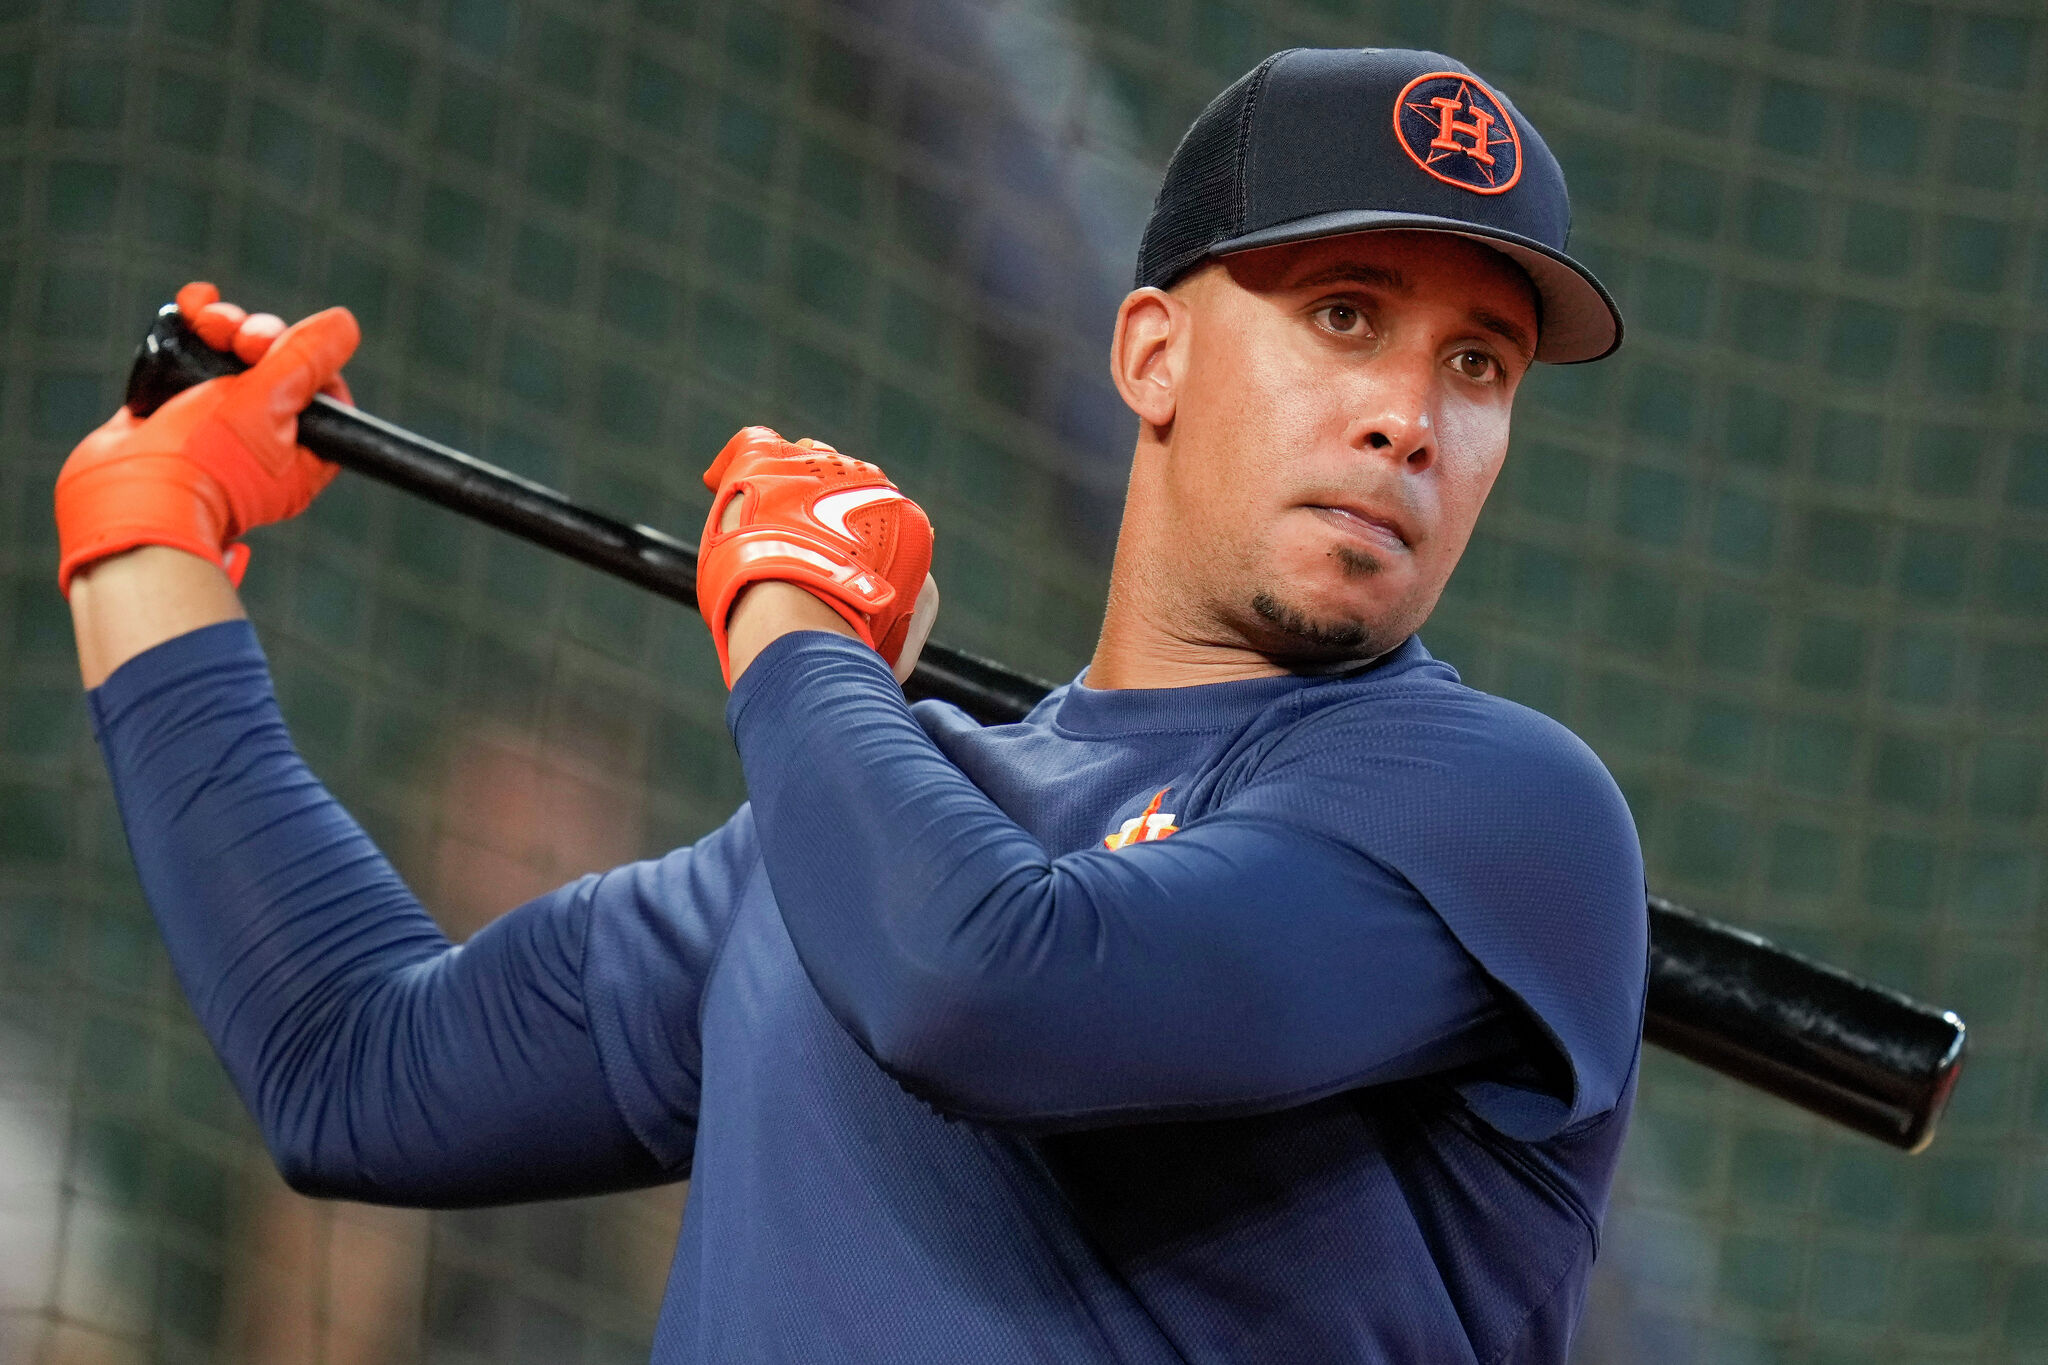 Michael Brantley hopeful to be in Astros' Opening Day lineup